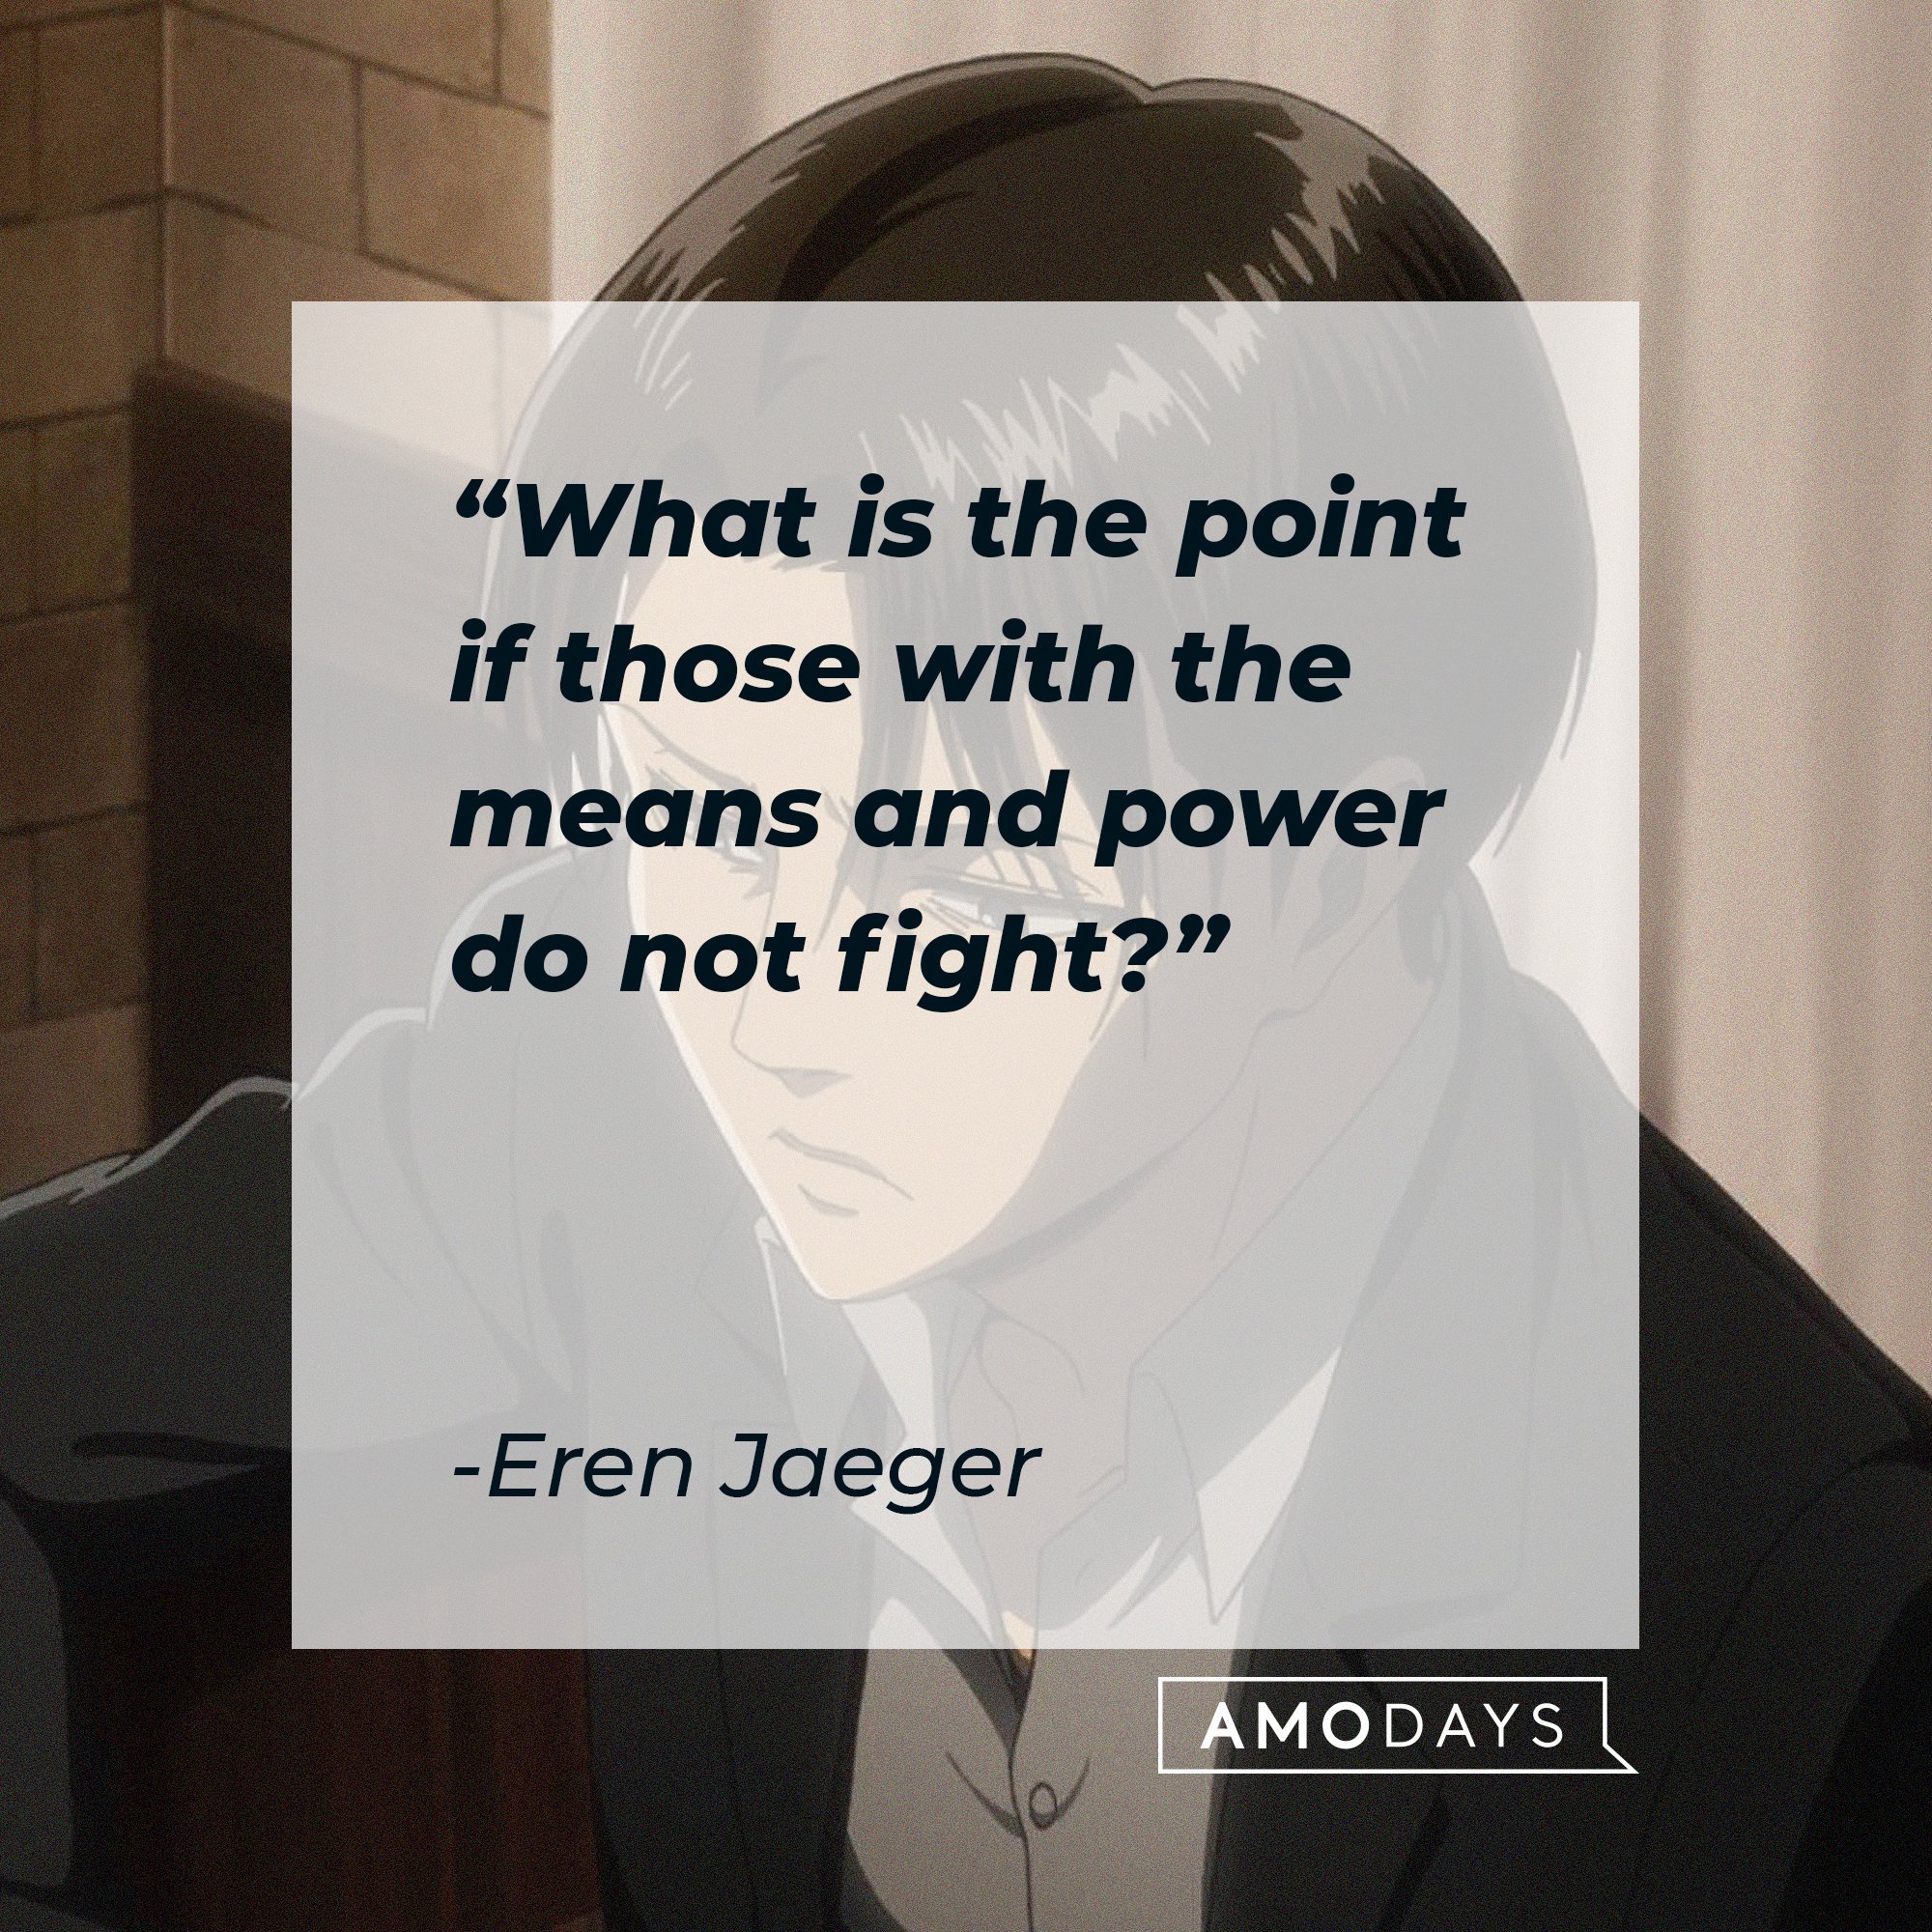 Eren Jaeger’s quote: "What is the point if those with the means and power do not fight?" | Image: AmoDays